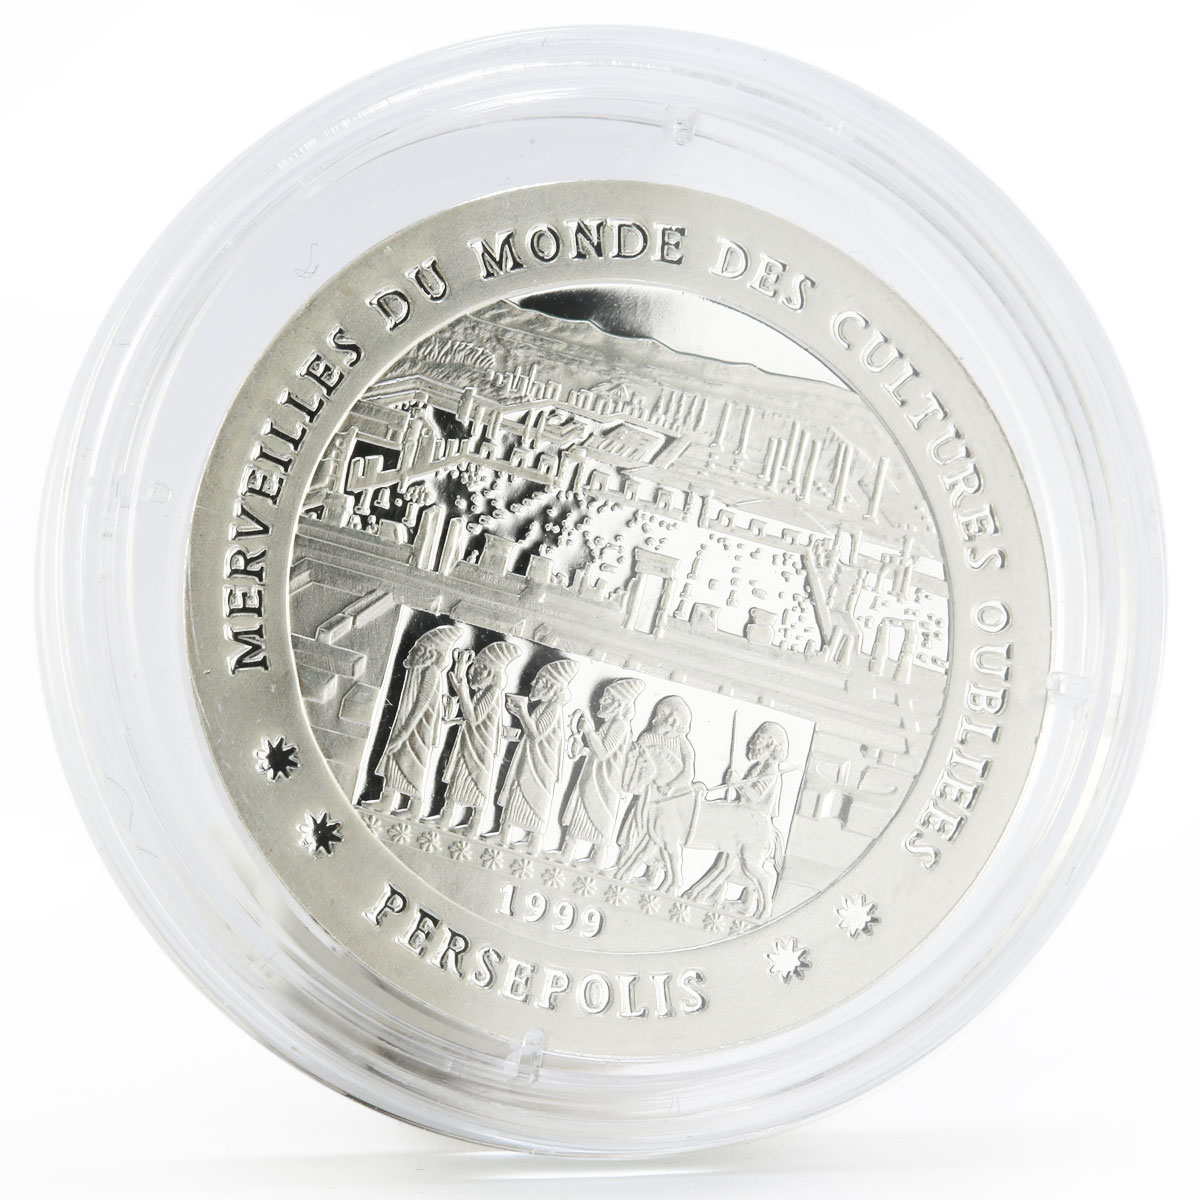 Chad 1000 francs Forgotten Cultures series Persepolis proof silver coin 1999